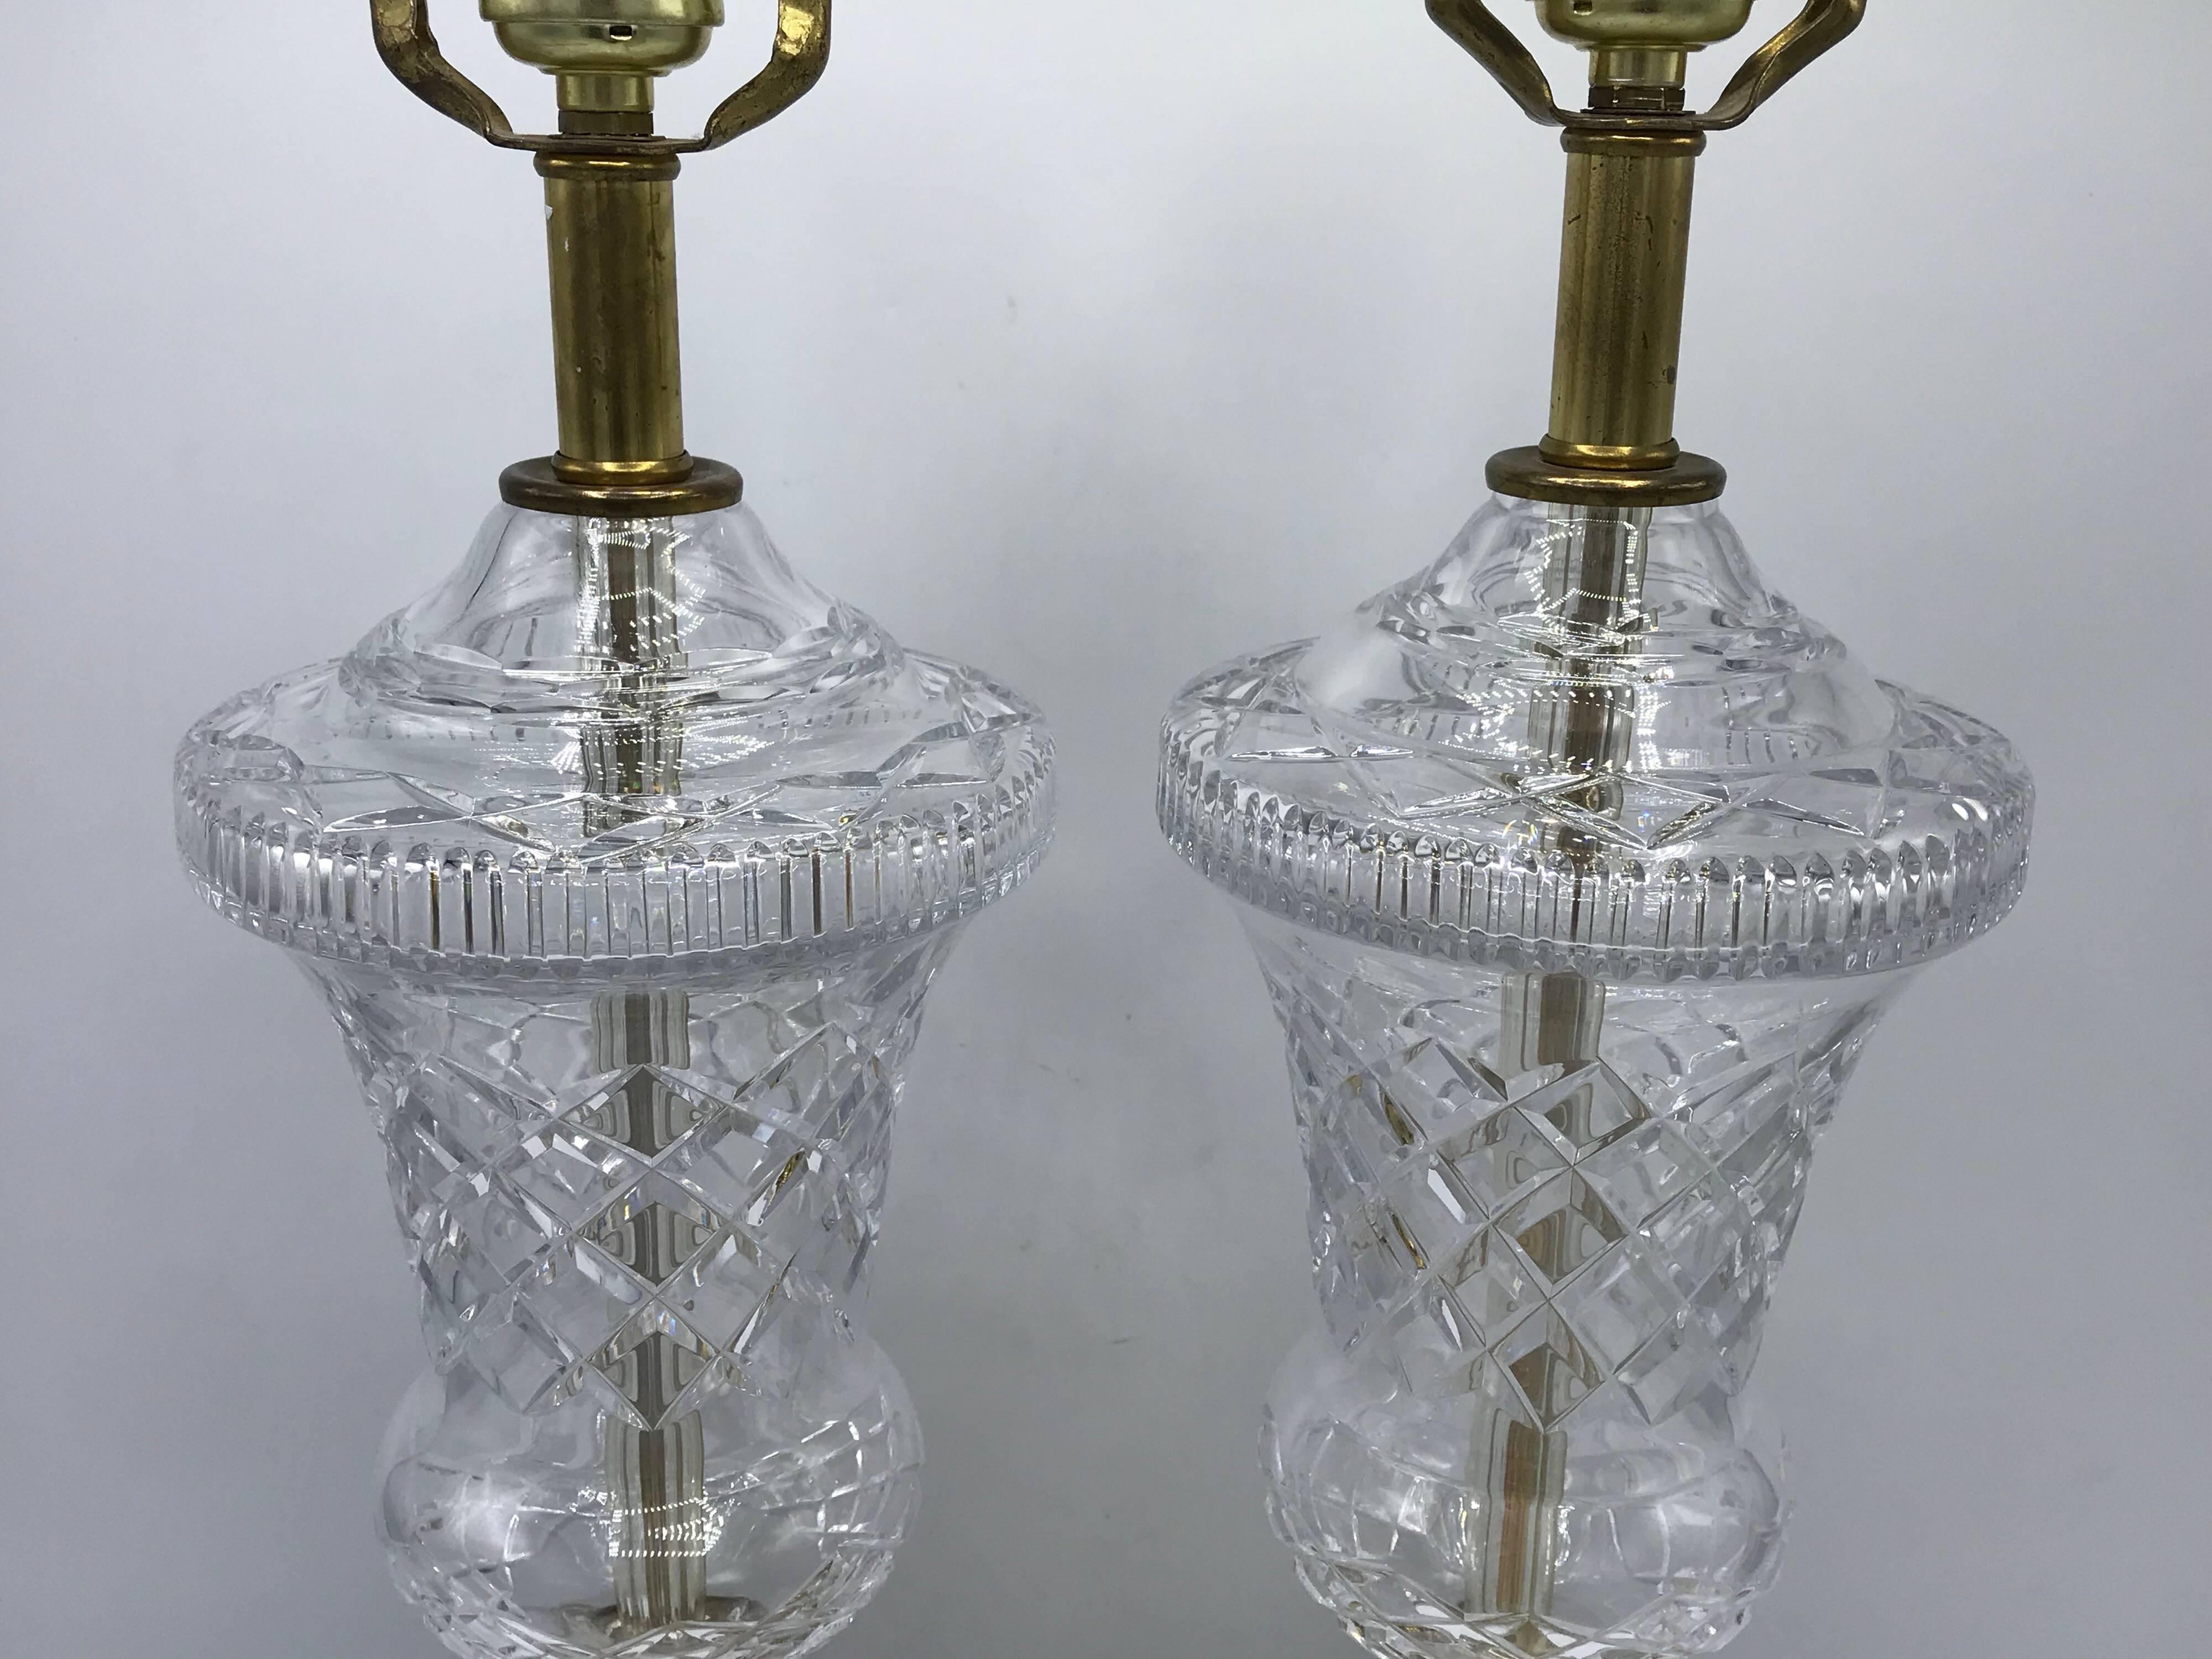 Listed is a fabulous, pair of 1940s French neoclassical-style cut crystal and brass lamps. Stunning detail, and stands tall at nearly two feet, from base to socket. Extremely heavy.